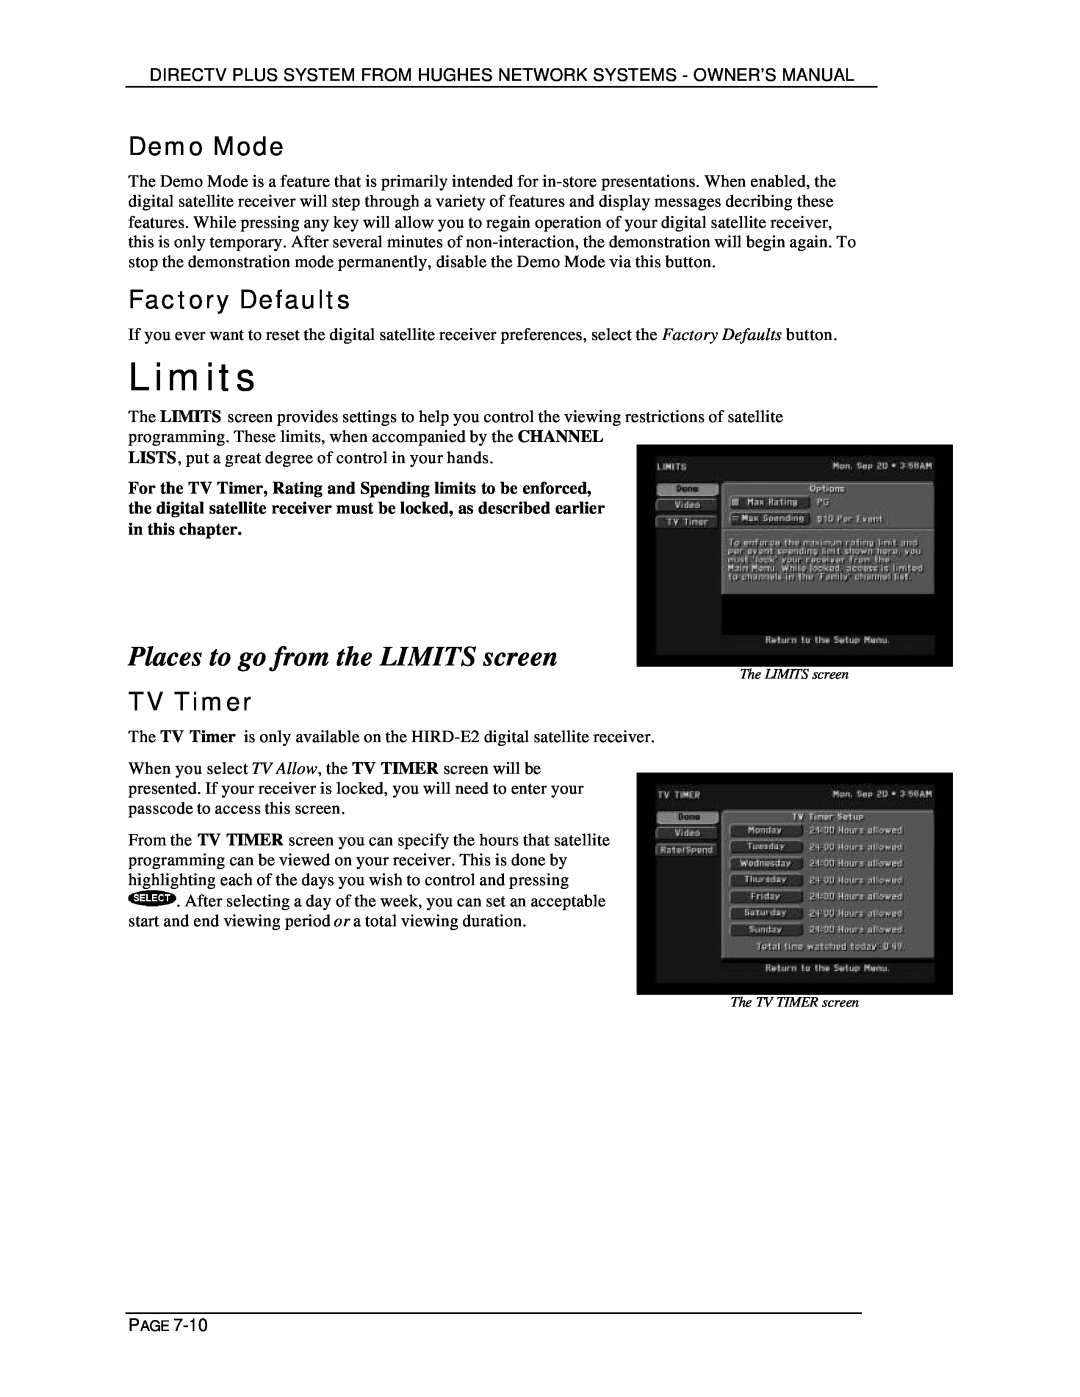 DirecTV HIRD-E25, HIRD-E11 owner manual Limits, Places to go from the LIMITS screen, Demo Mode, Factory Defaults, TV Timer 